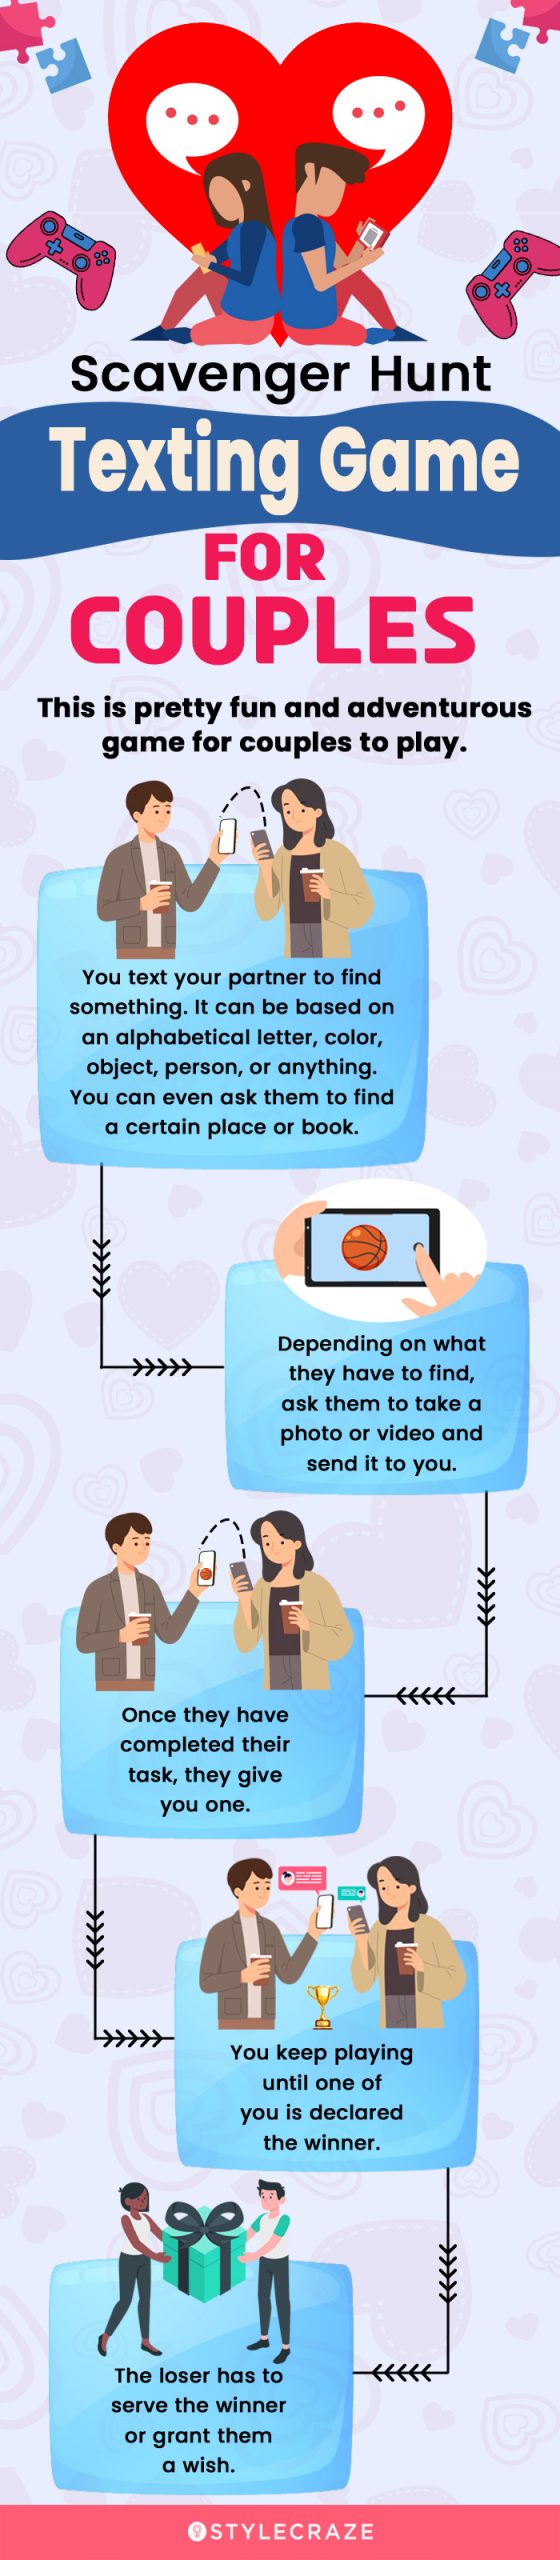 scavenger hunt texting game for couples [infographic]